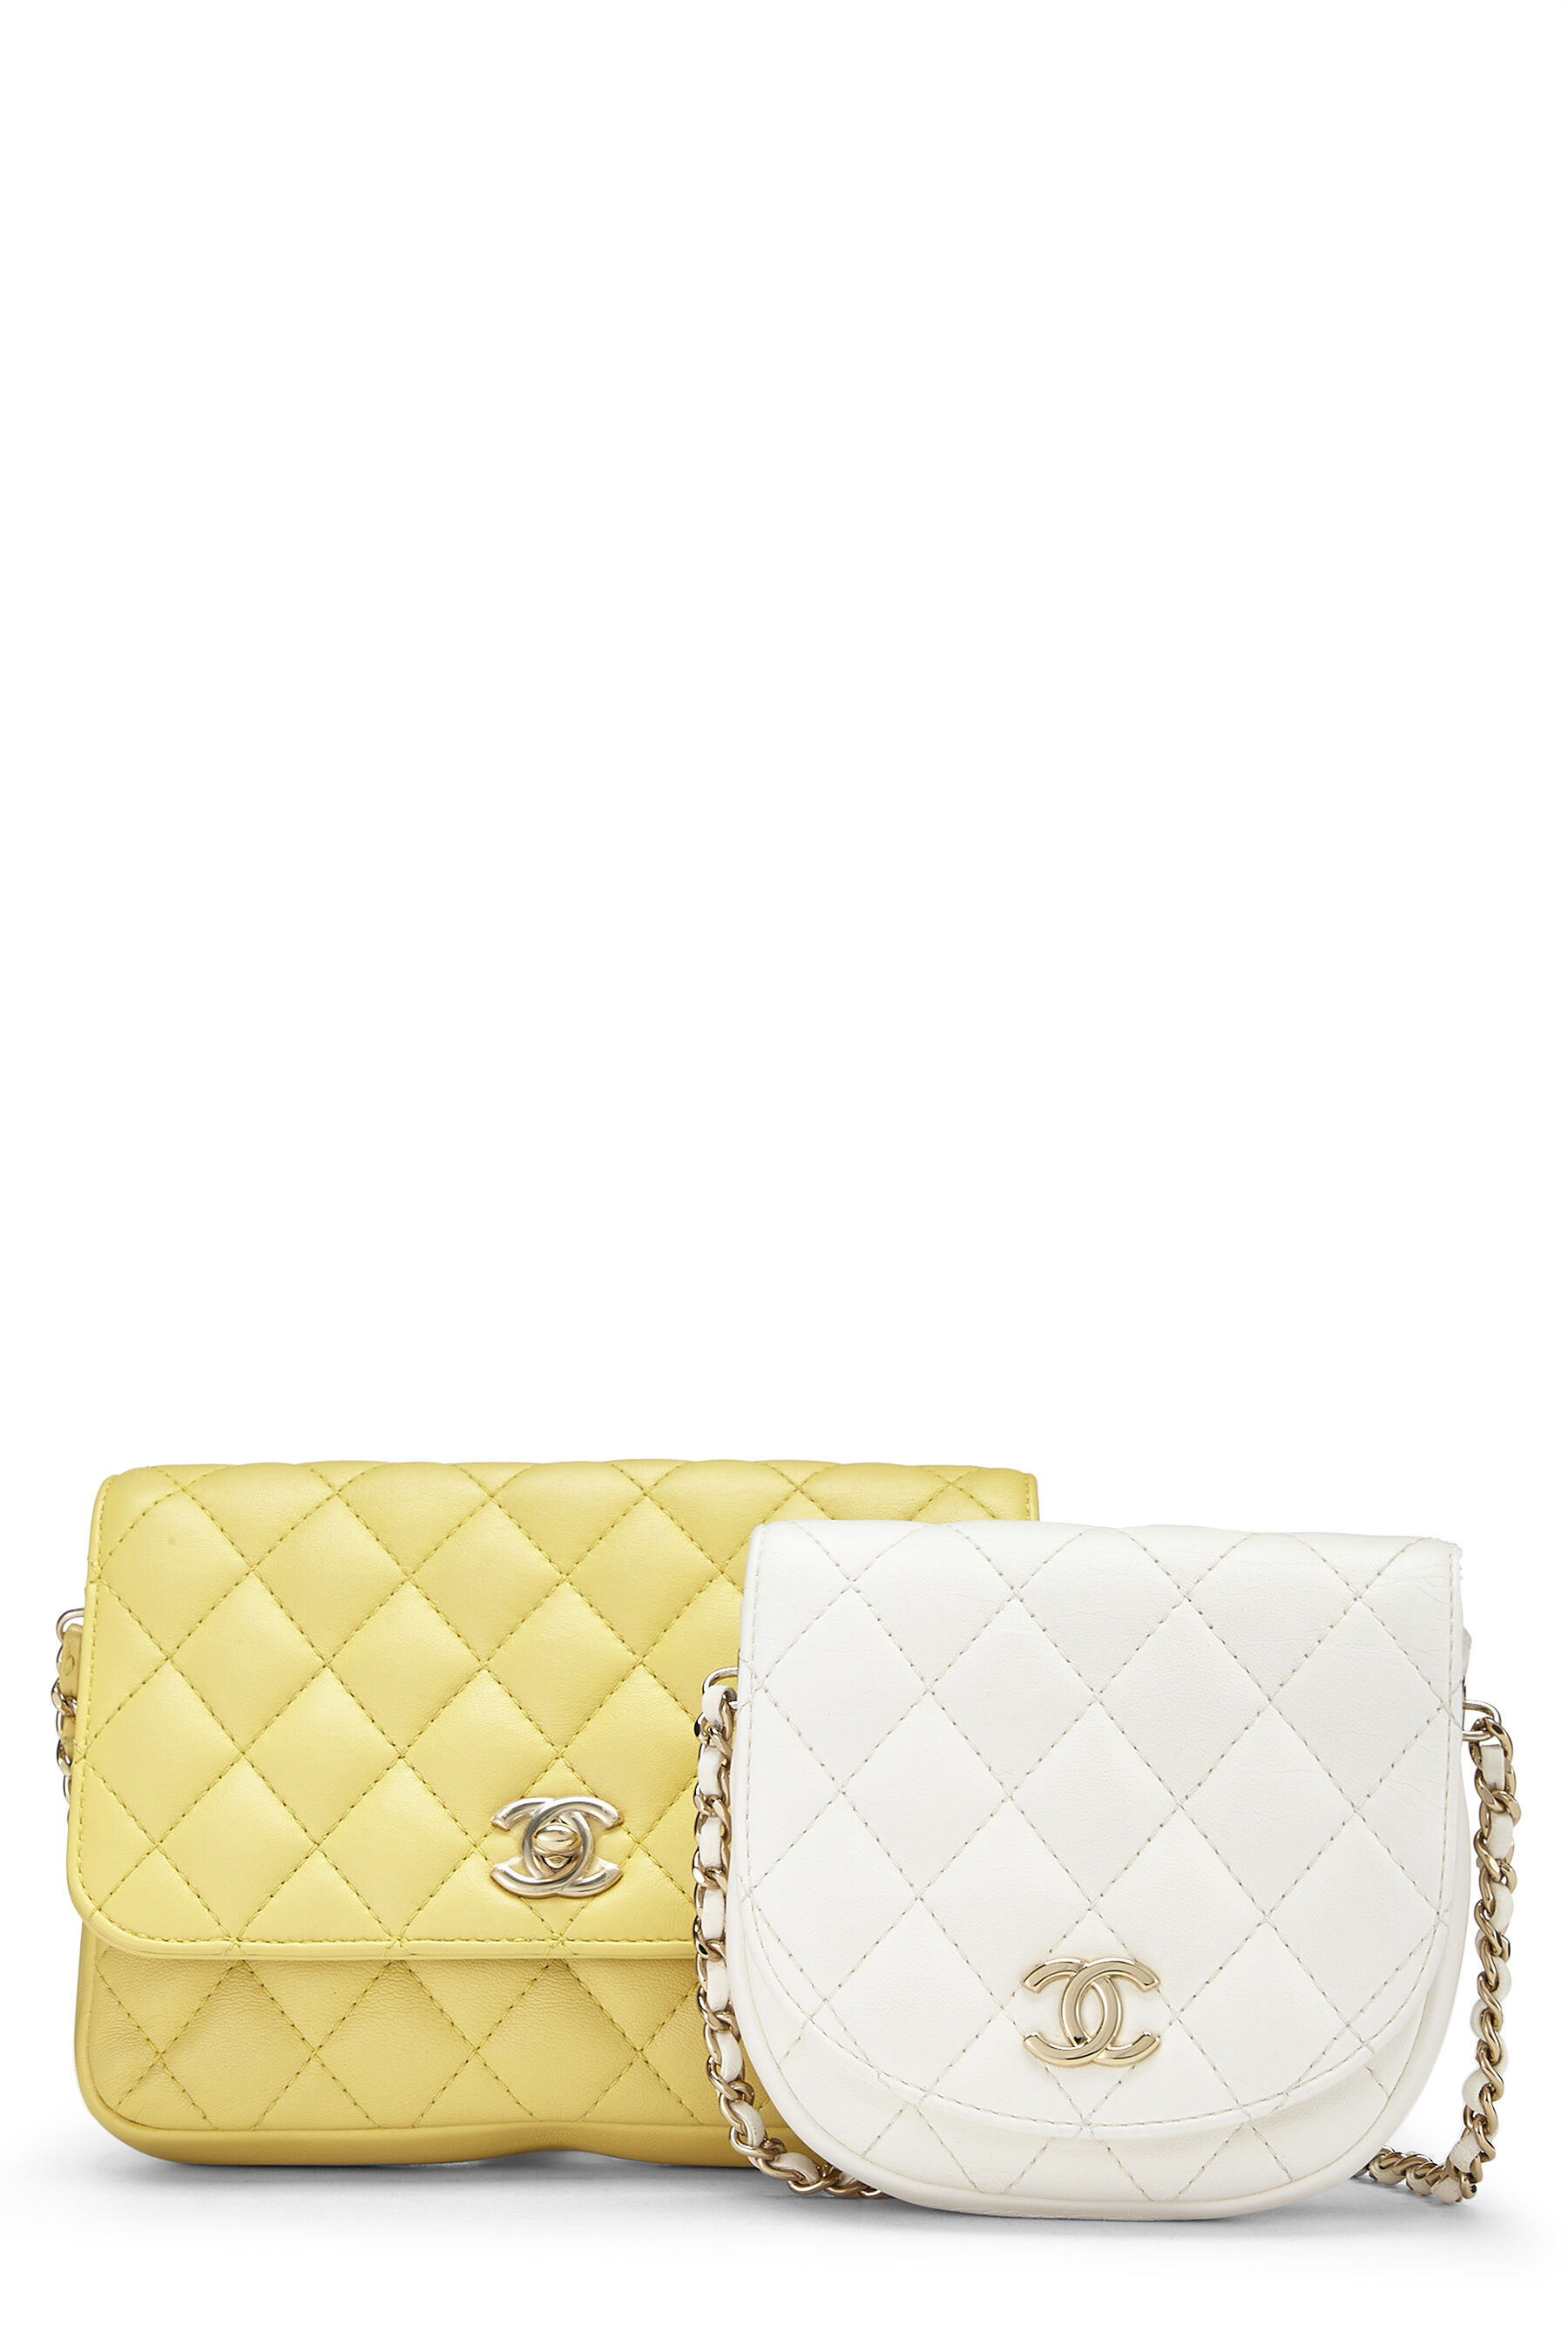 CHANEL Yellow Quilted Bags & Handbags for Women